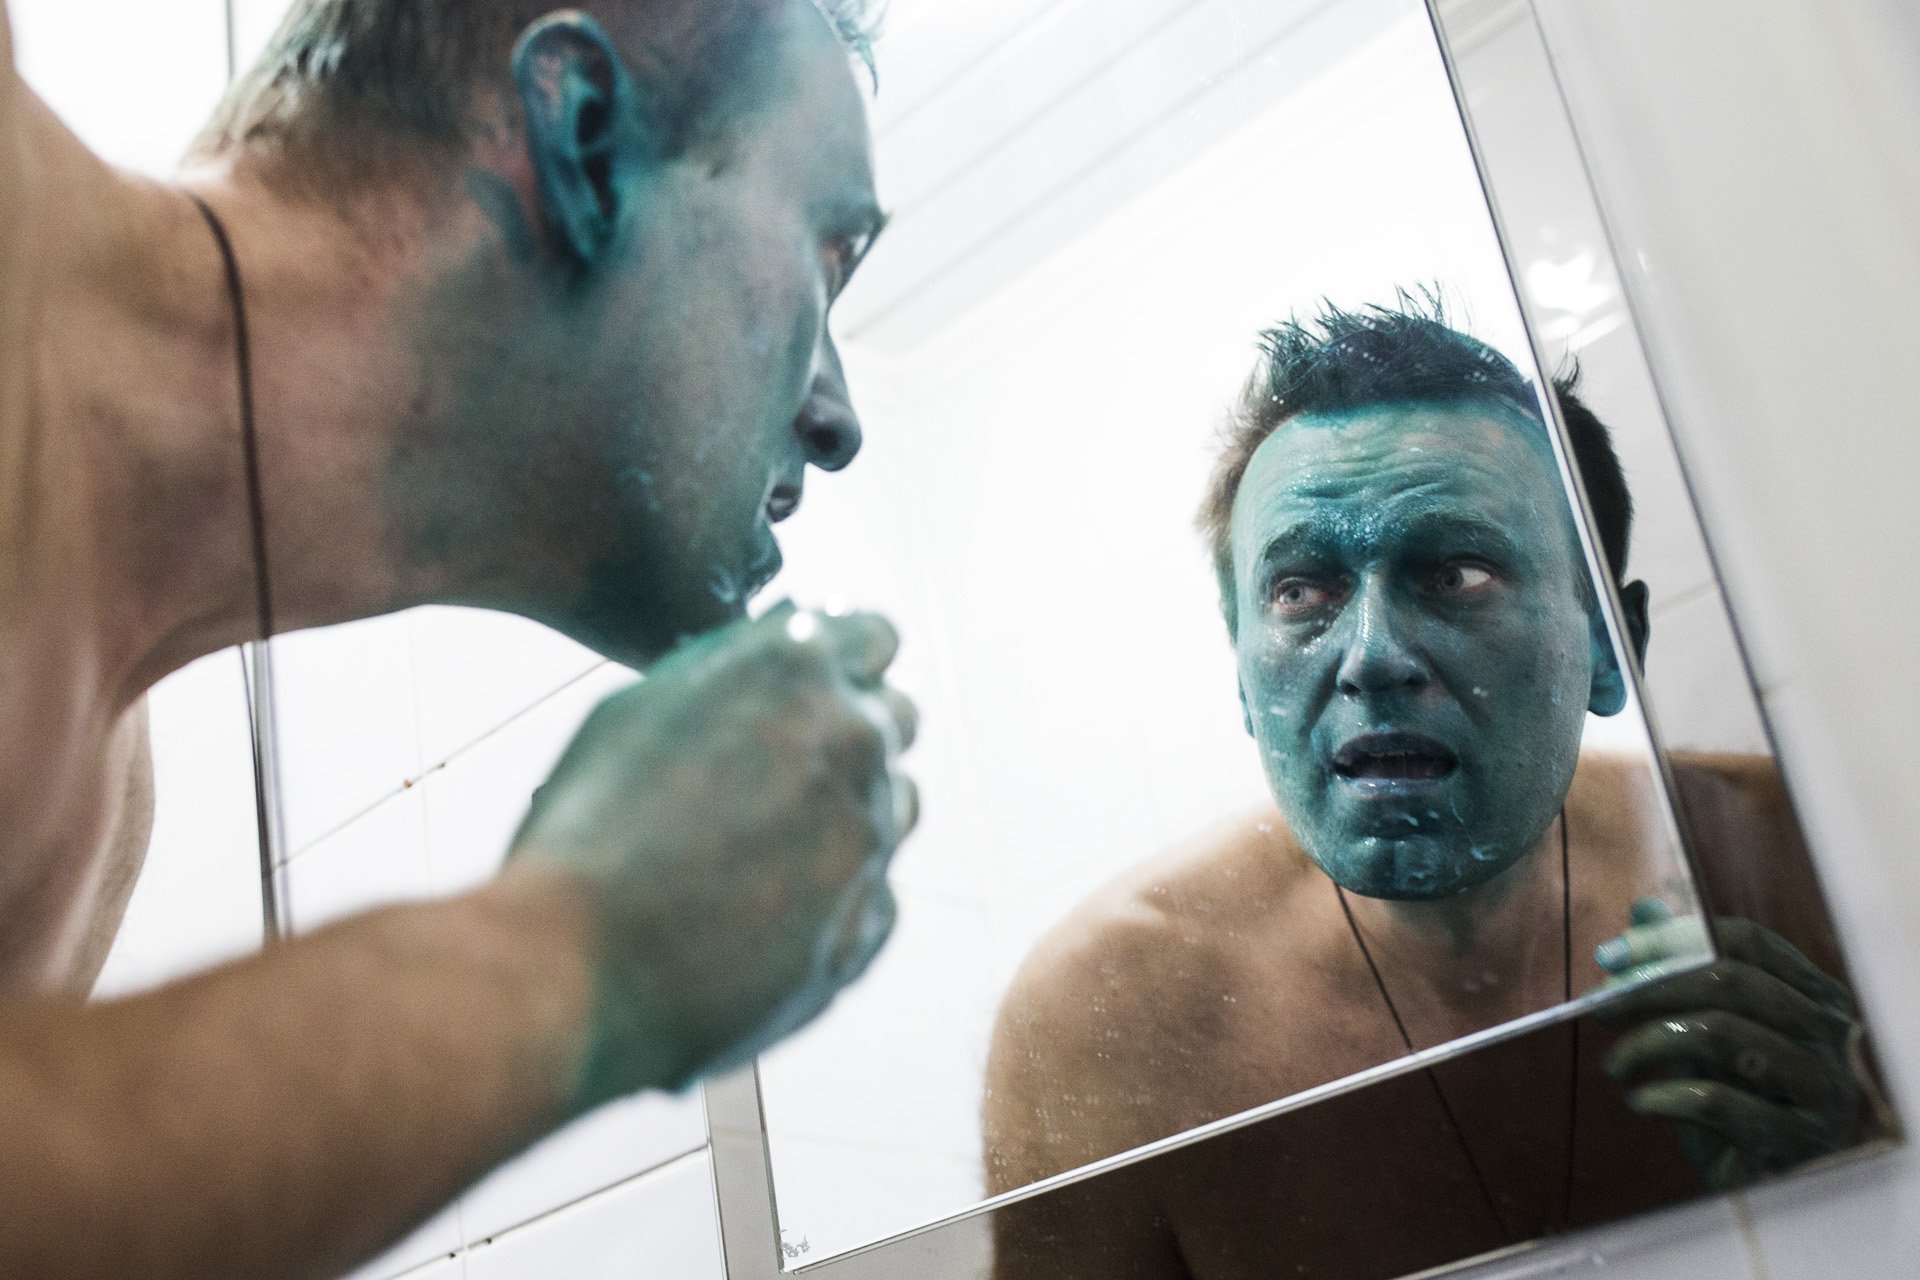  Alexey Navalny, frightened, looks in the mirror after he was attacked with a caustic green liquid in Barnaul, Russia on March 20, 2017. From the beginning of his campaign, Navalny was constantly attacked by locals allegedly tied to the government. L